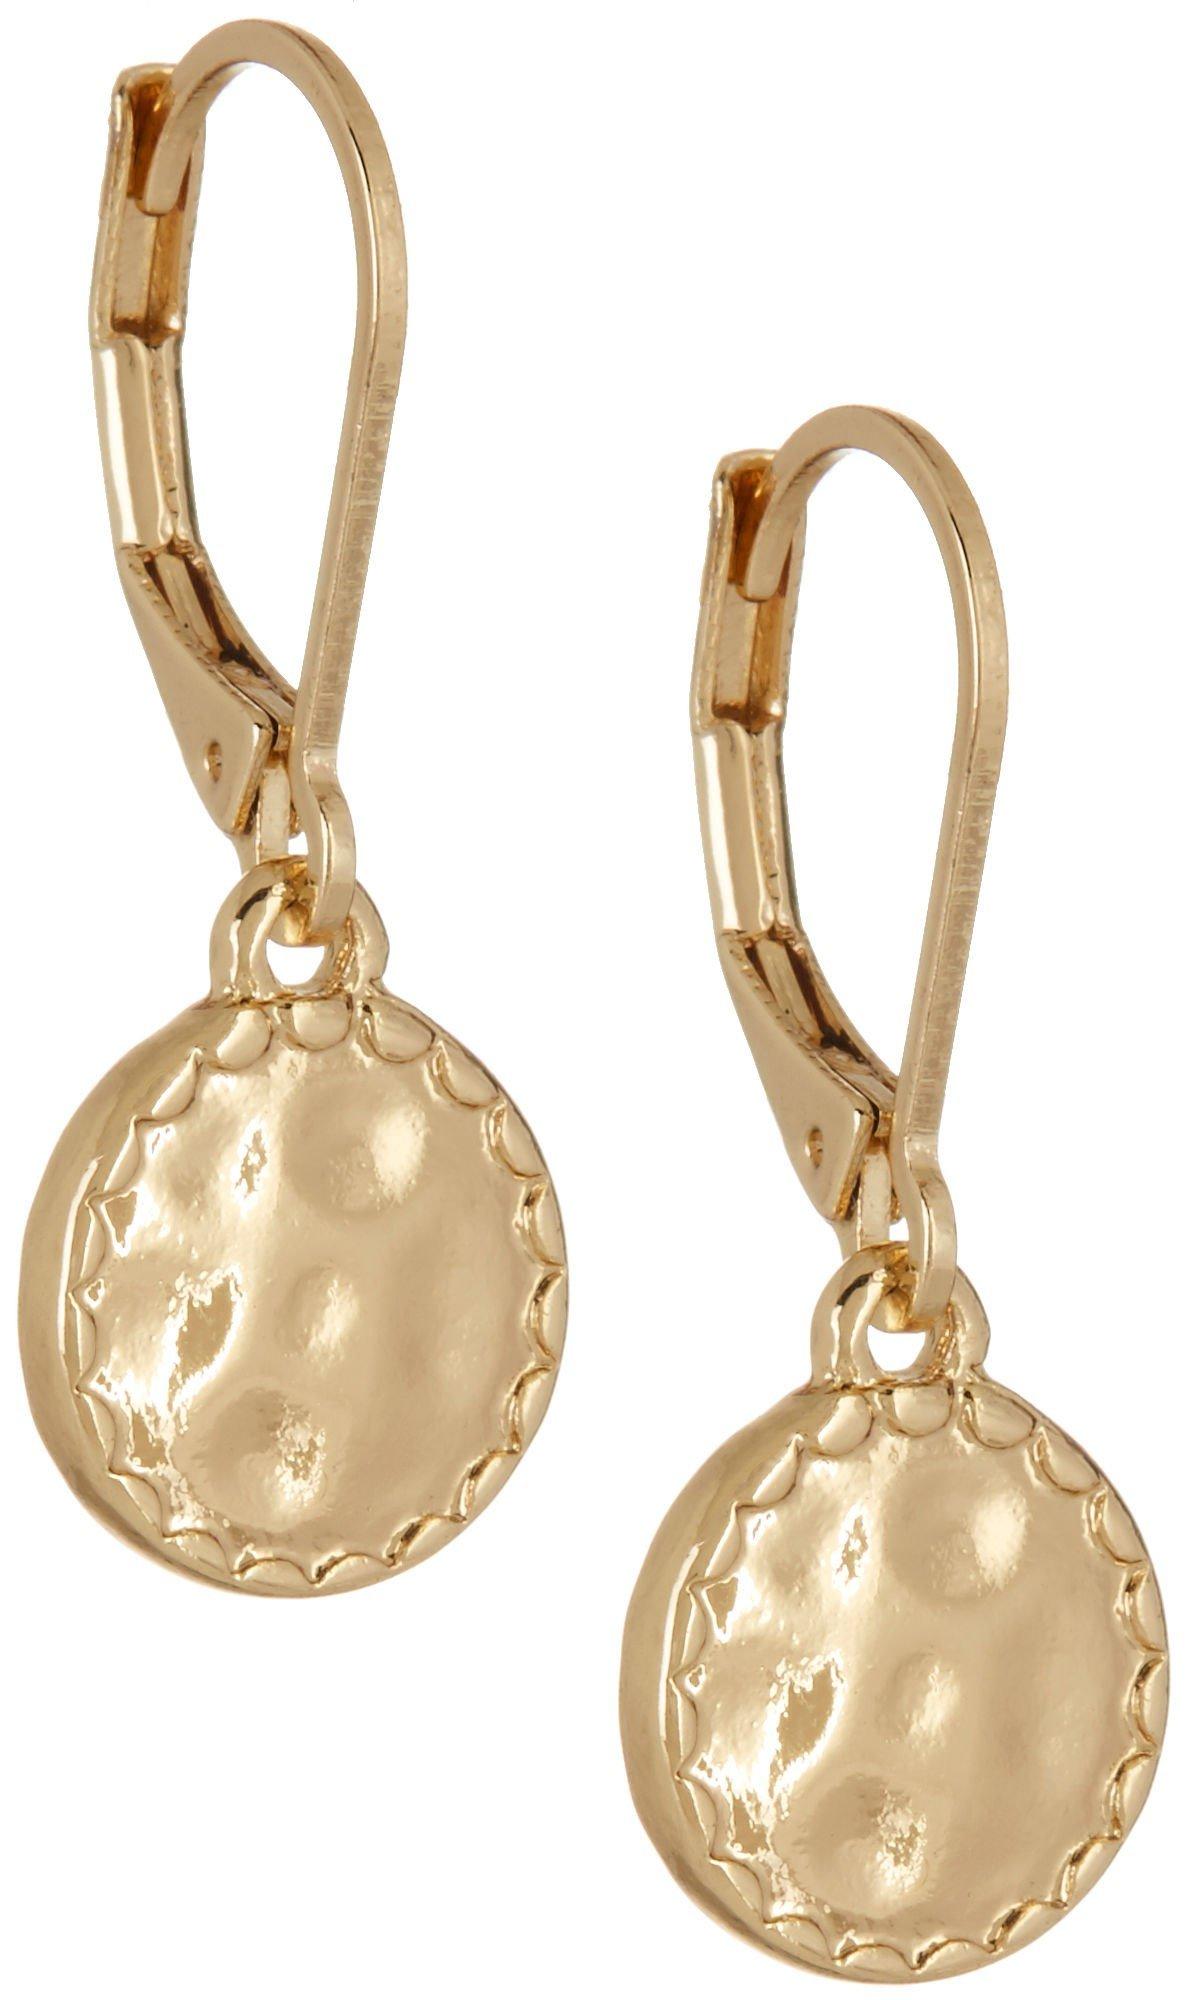 Napier Gold Tone Hammered Disc Drop Earrings